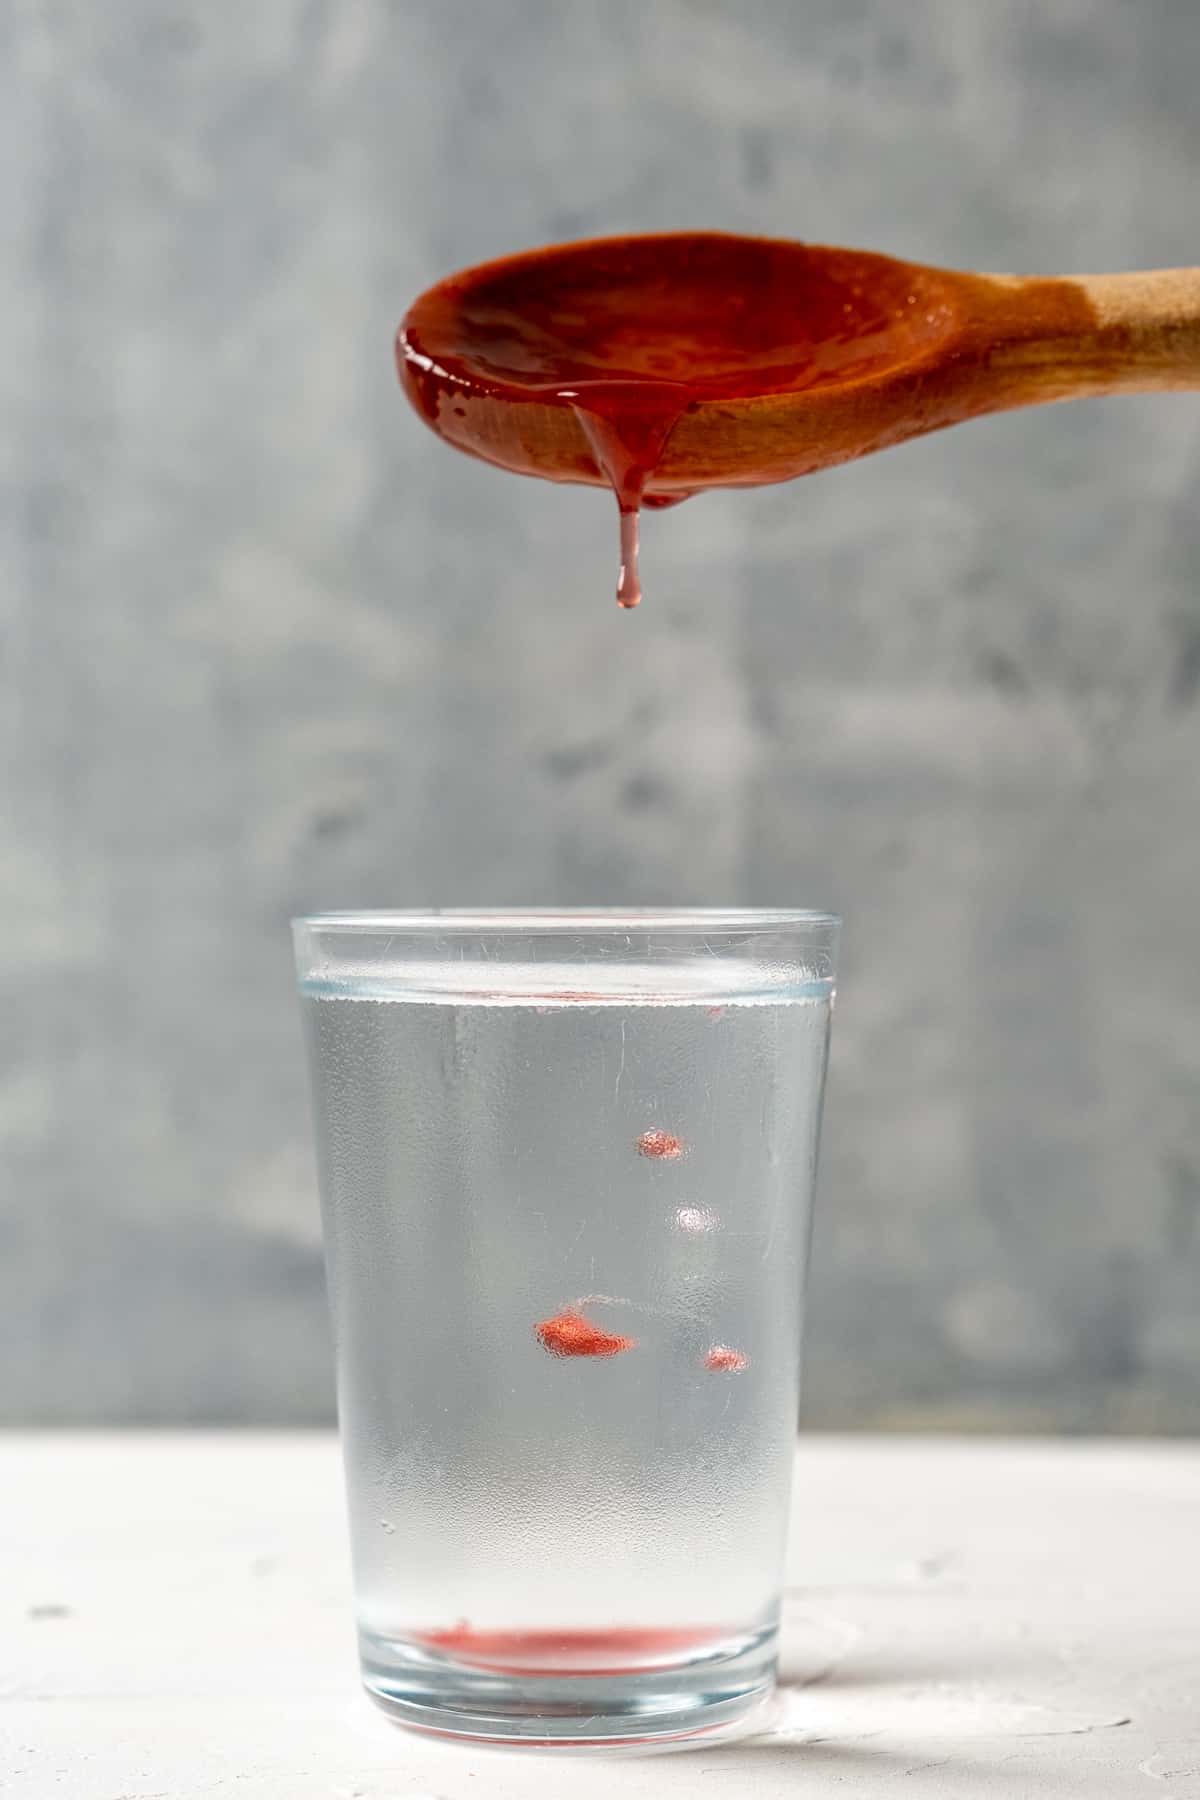 Dropping a little jam into a glass of cold water to test the consistency of the plum jam.